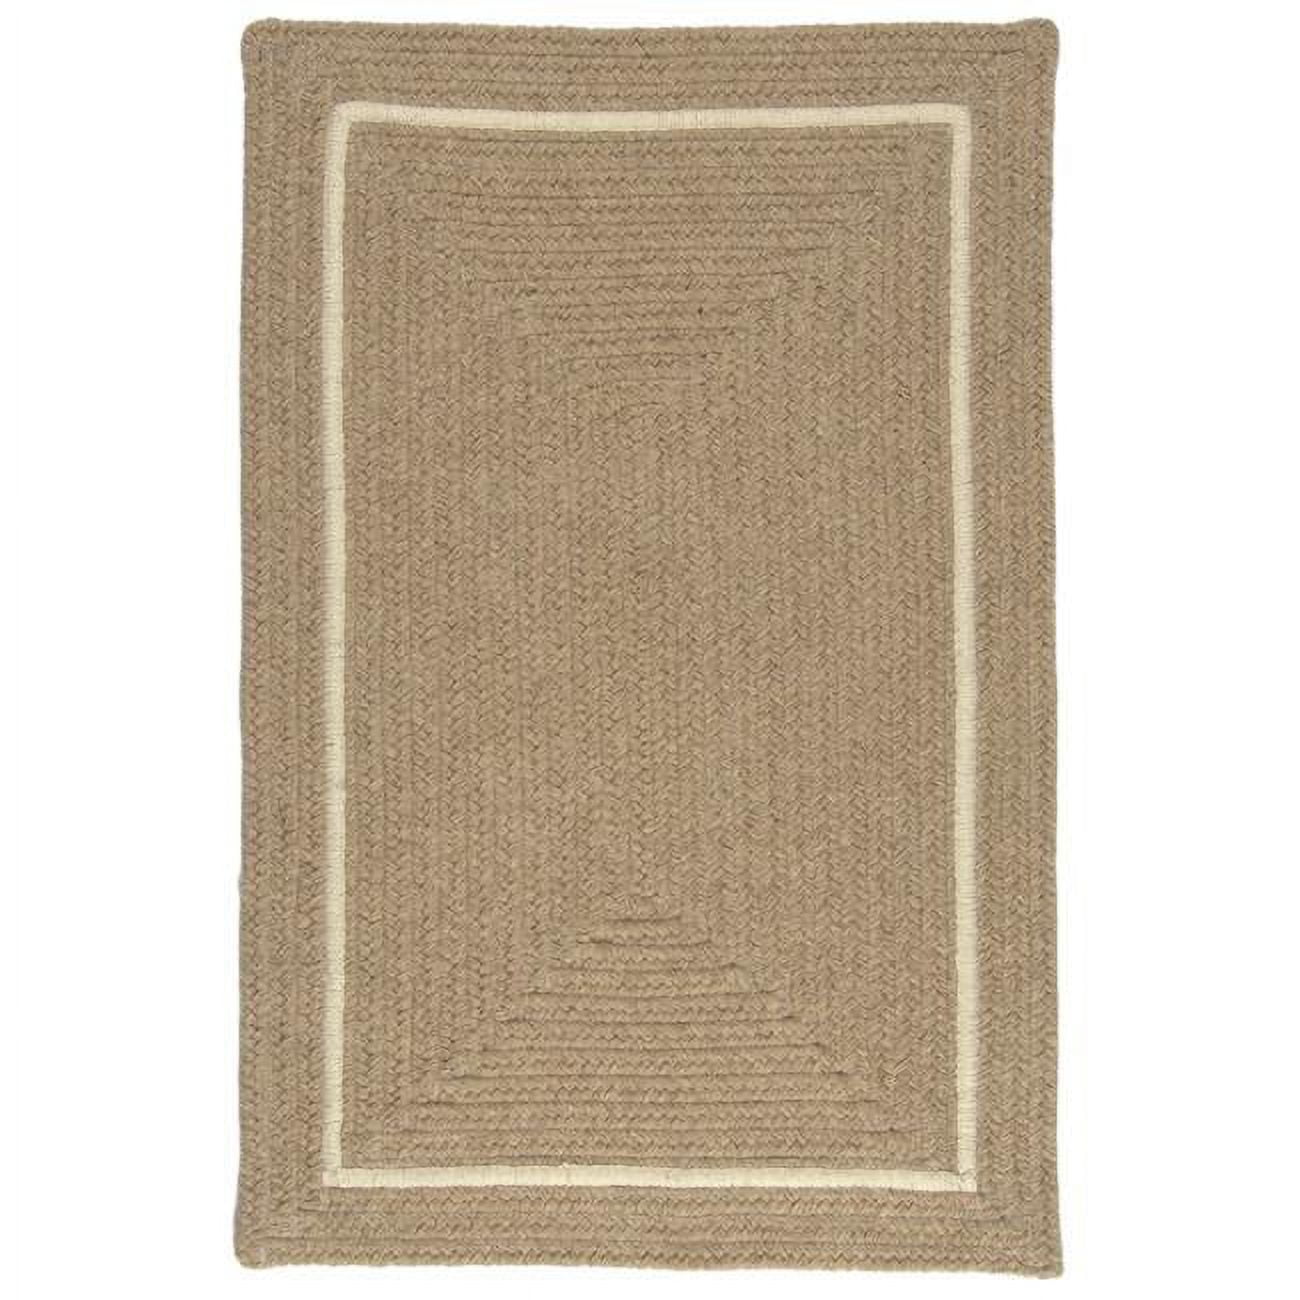 Picture of Colonial Mills EN33 2 x 5 ft. Shear Natural Rug, Beige